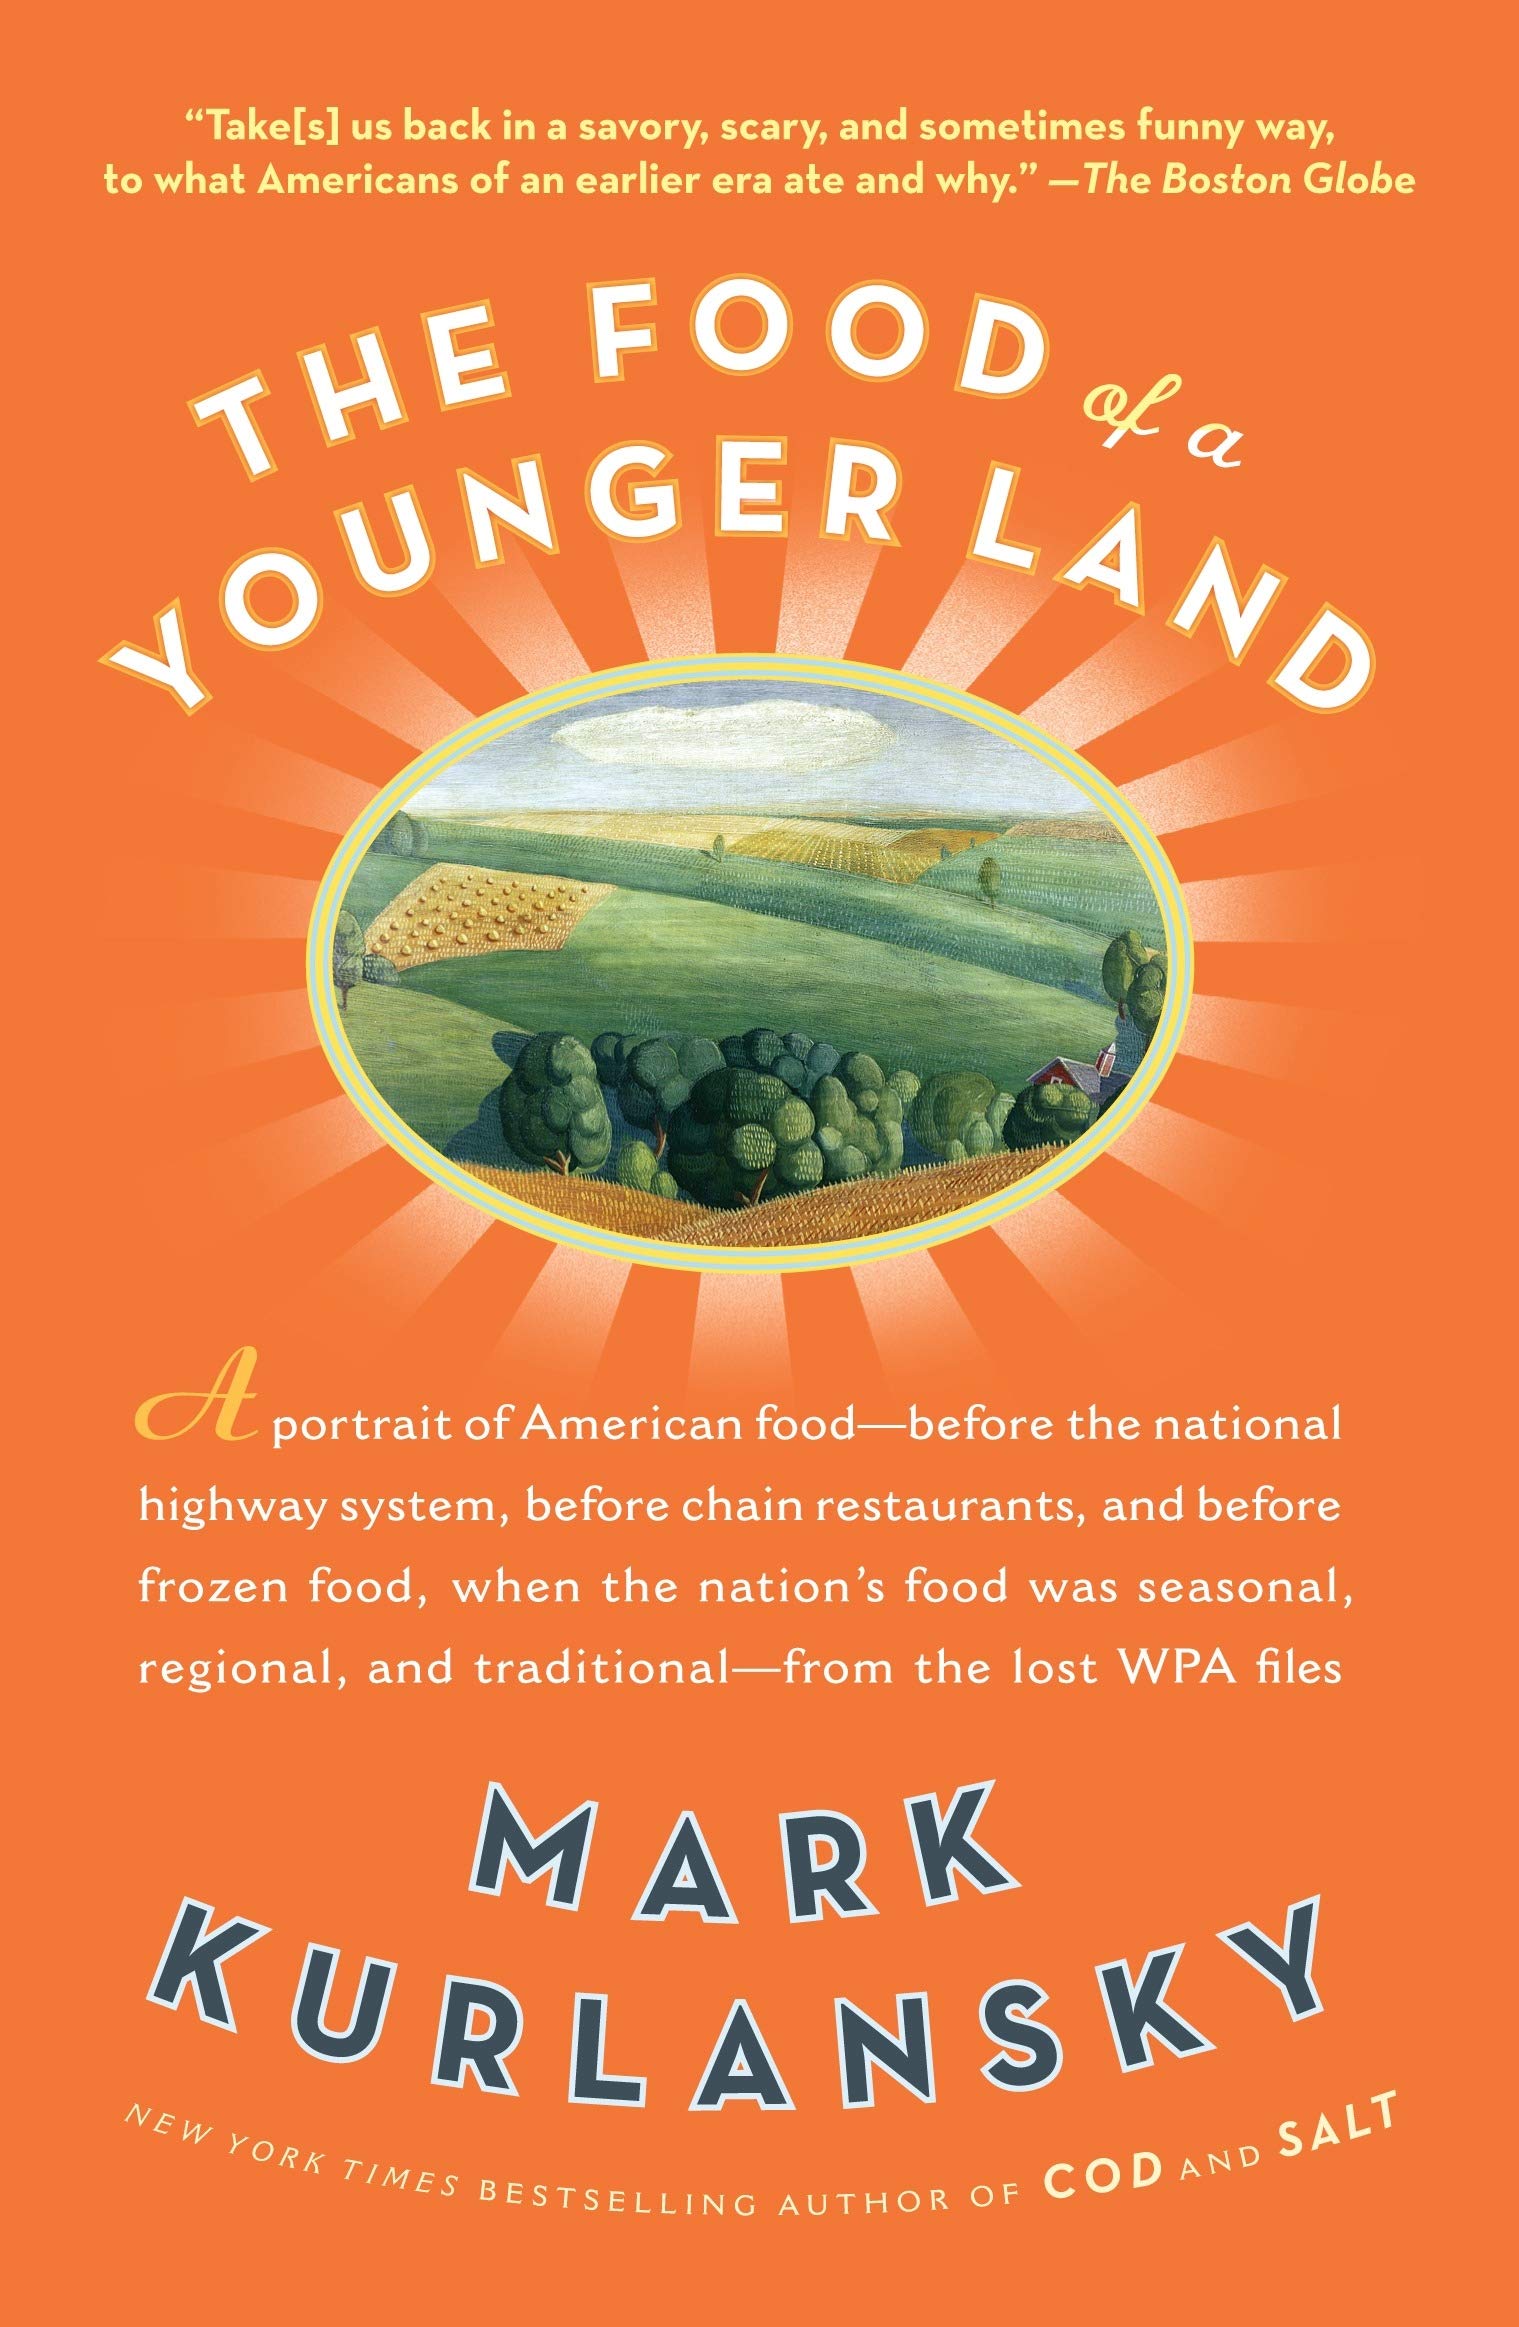 The Food of a Younger Land: A portrait of American food from the lost WPA files (Mark Kurlansky)